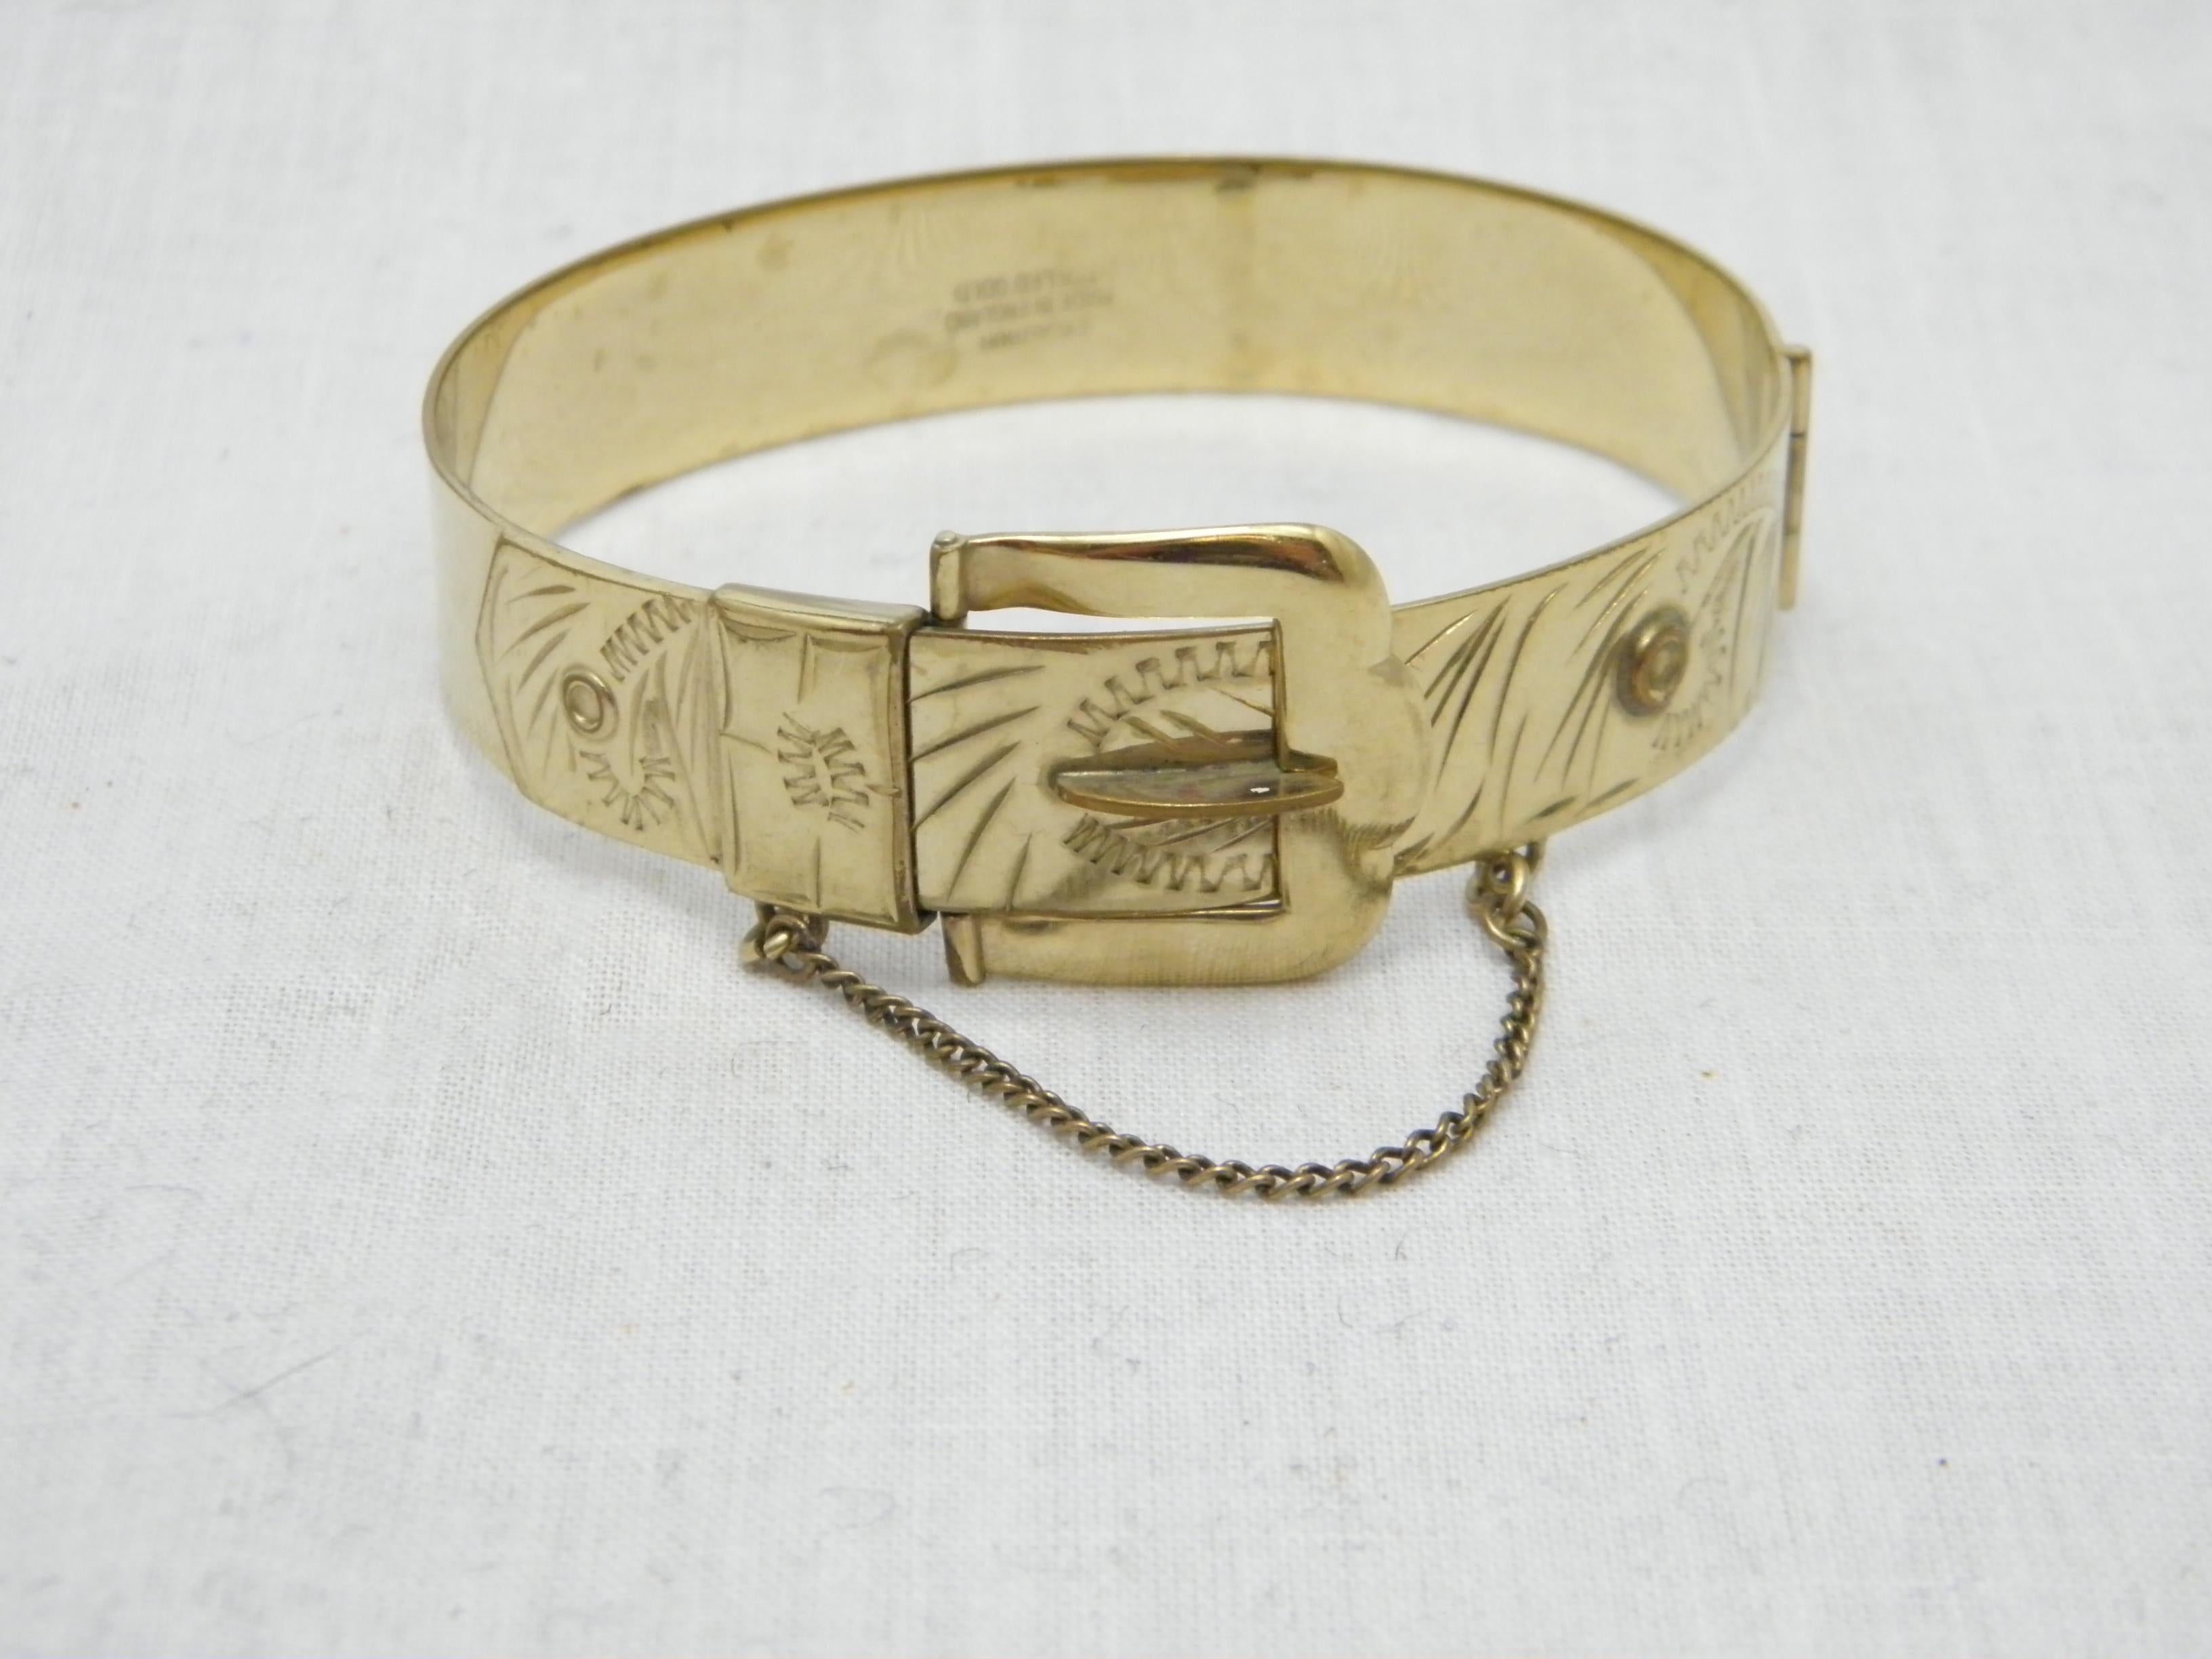 If you have landed on this page then you have an eye for beauty.

12CT GOLD ROLLED BUCKLE CUFF BANGLE BRACELET

DETAILS
Material: Thick 12ct Rolled Gold (see details below)
Style: Hinged Cuff with Hand Engraved Leaf detail and working buckle